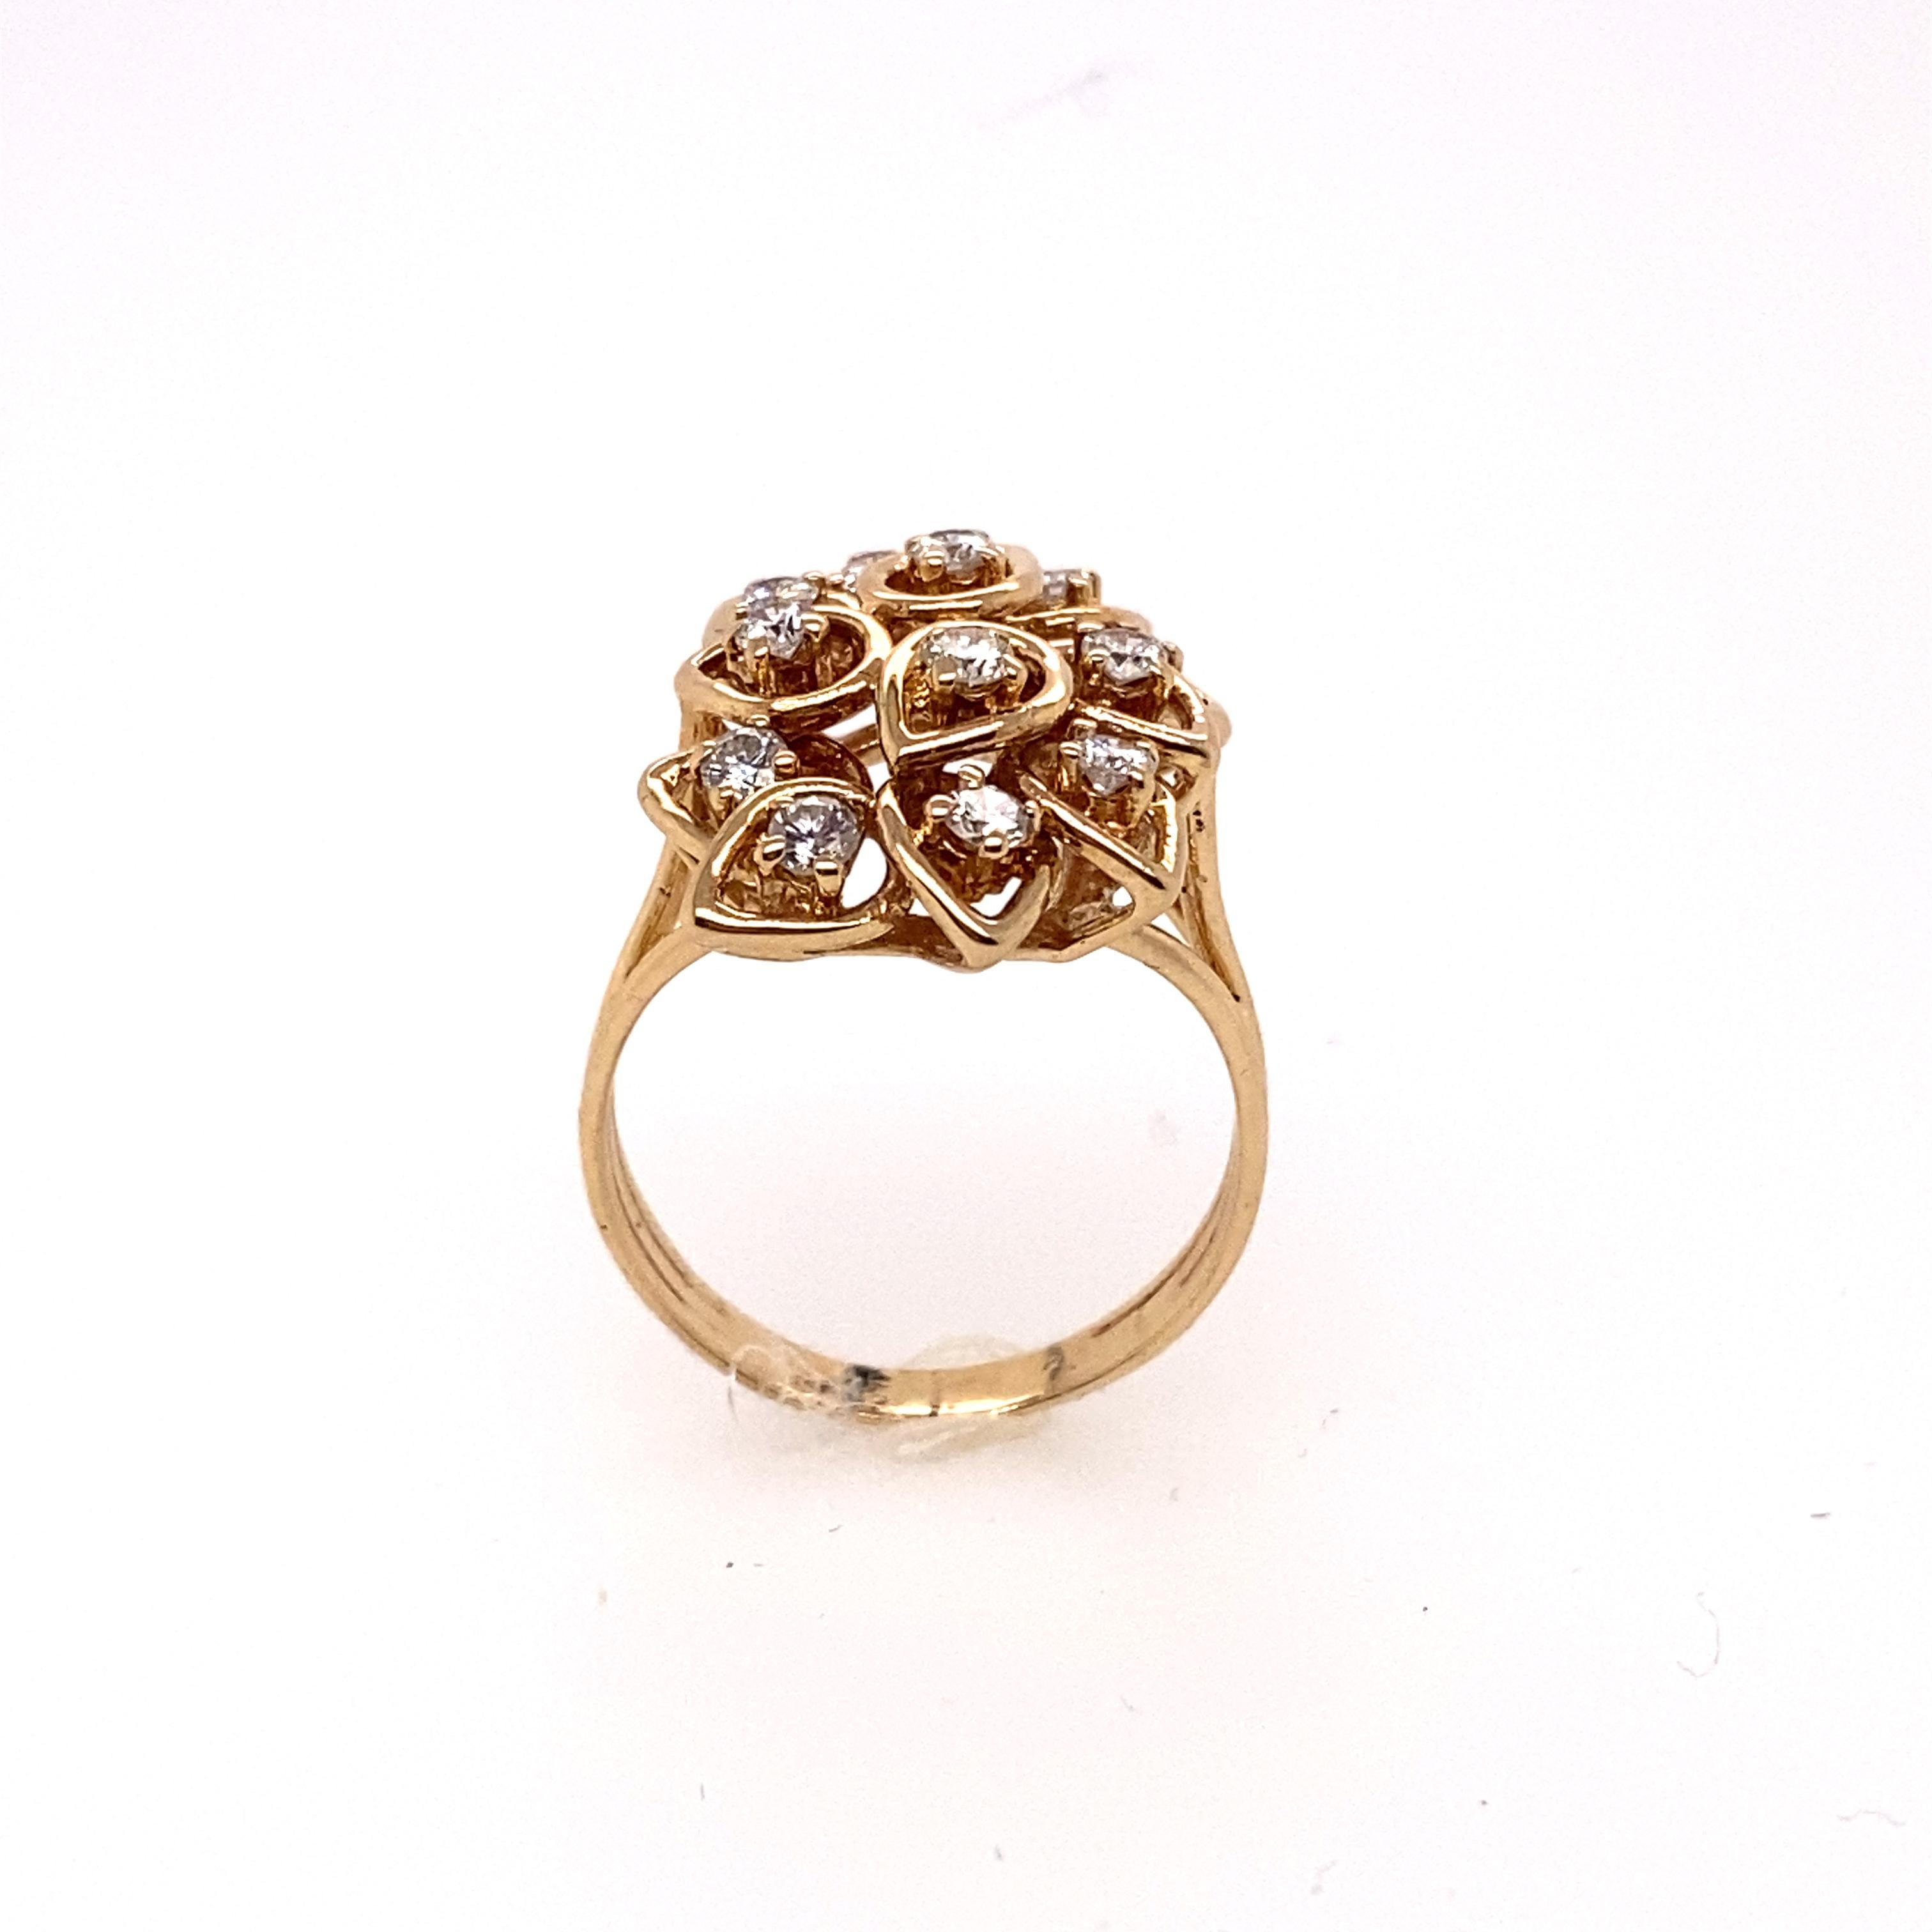 The twelve brilliant round diamonds set in the 14 Karat yellow gold ring featured by a flower cluster design. This ring features a very fashionable look and can be worn in everyday

Diamonds Weight: 0.50 carat
Diamonds Shape : Brilliant